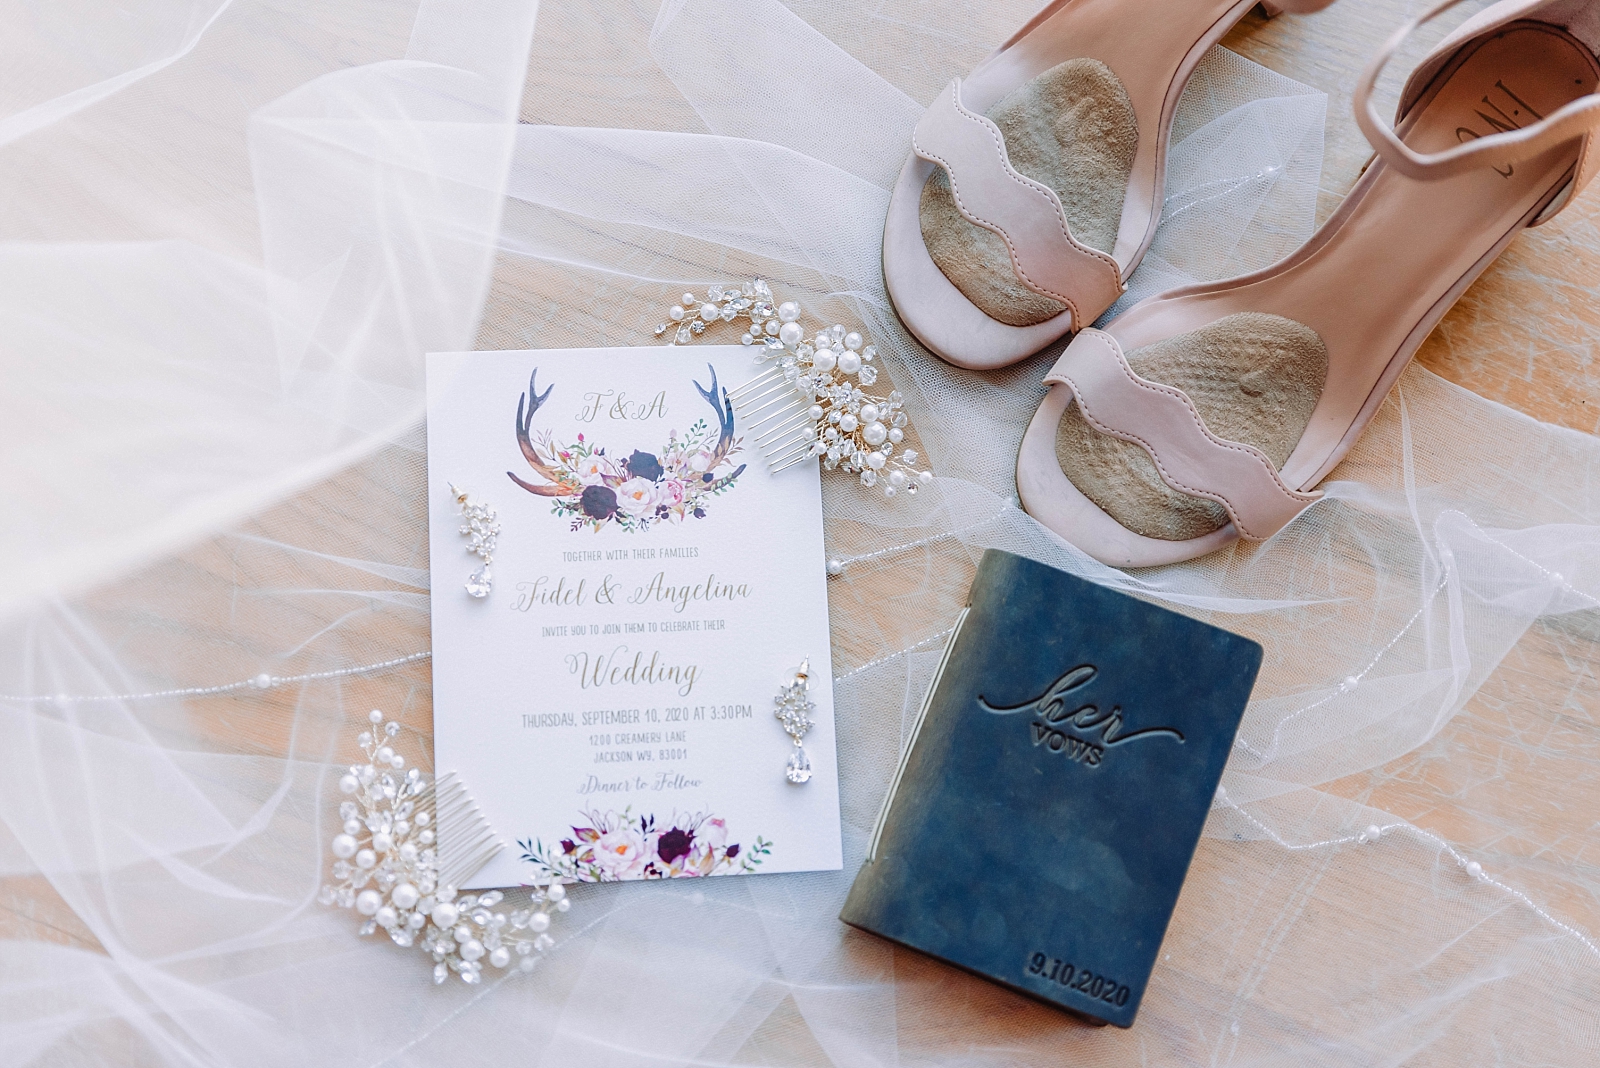 bridal details with wedding invitation on lace veil with blush bridal shoes